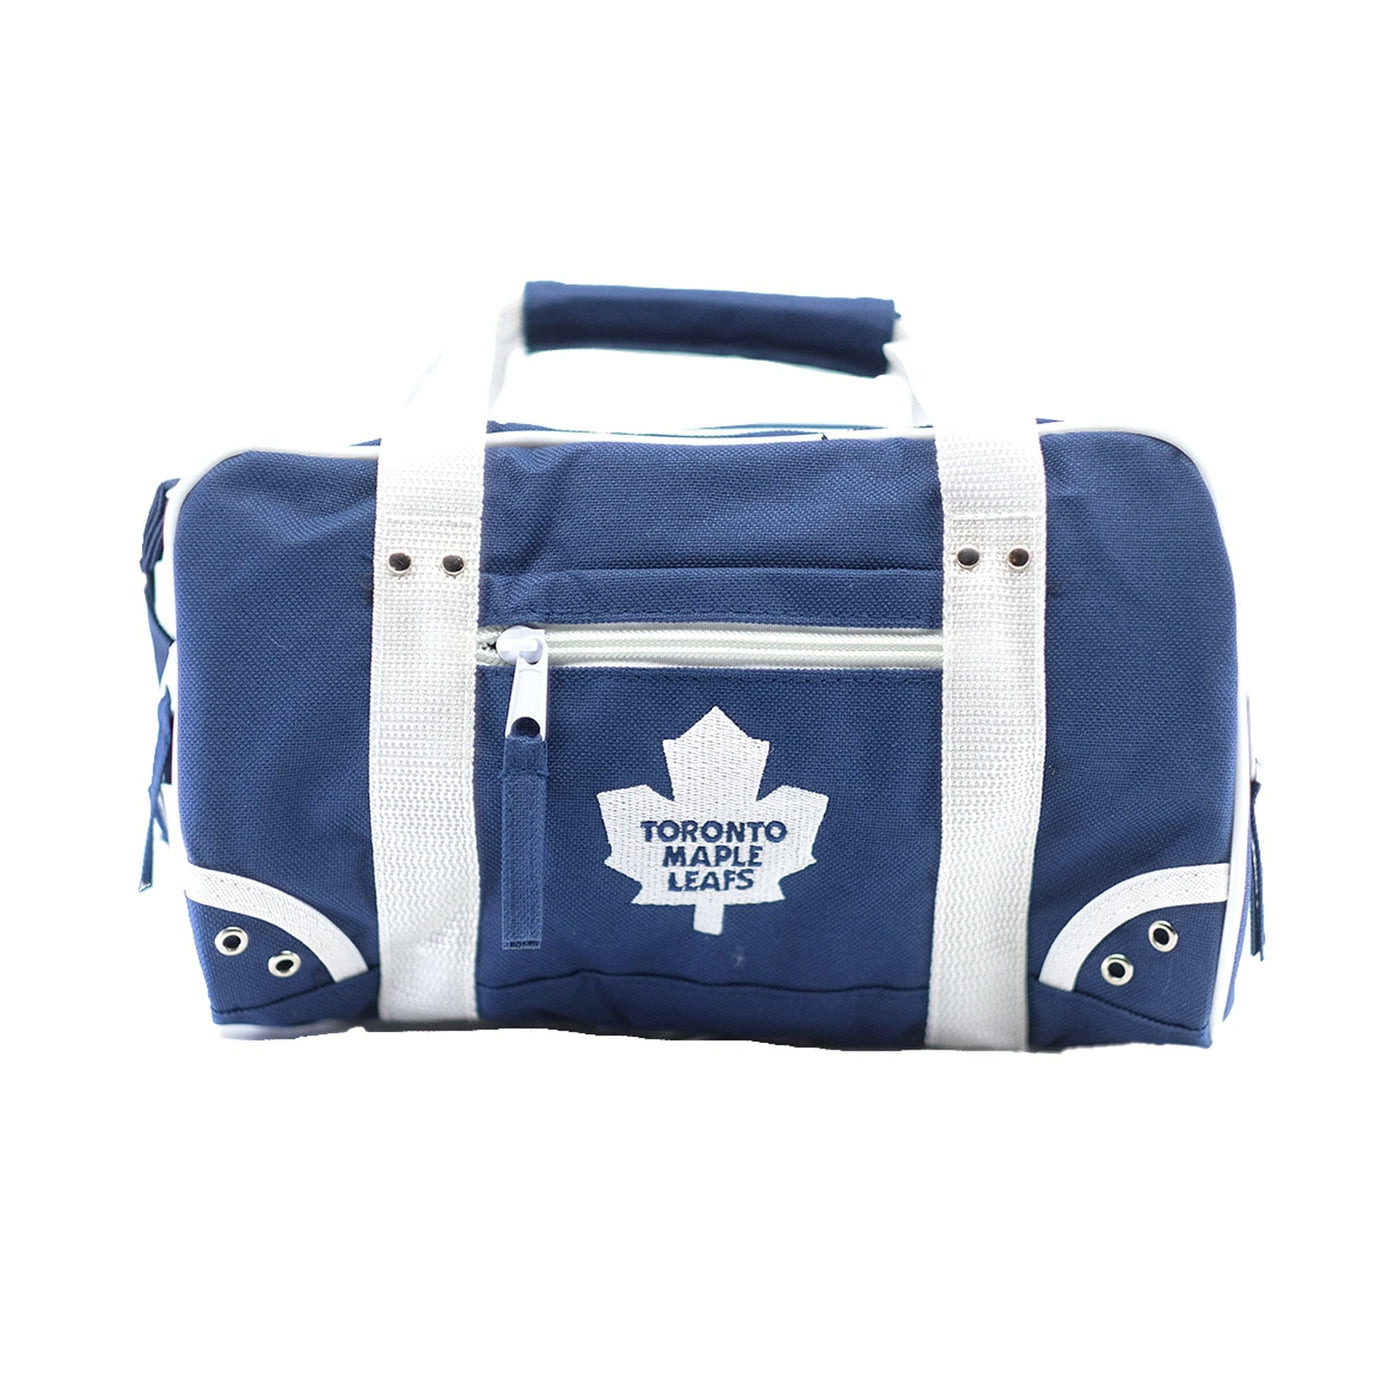 Toronto Maple Leafs Ultimate Sports Kit NHL Toiletry Bag - The Hockey Shop Source For Sports